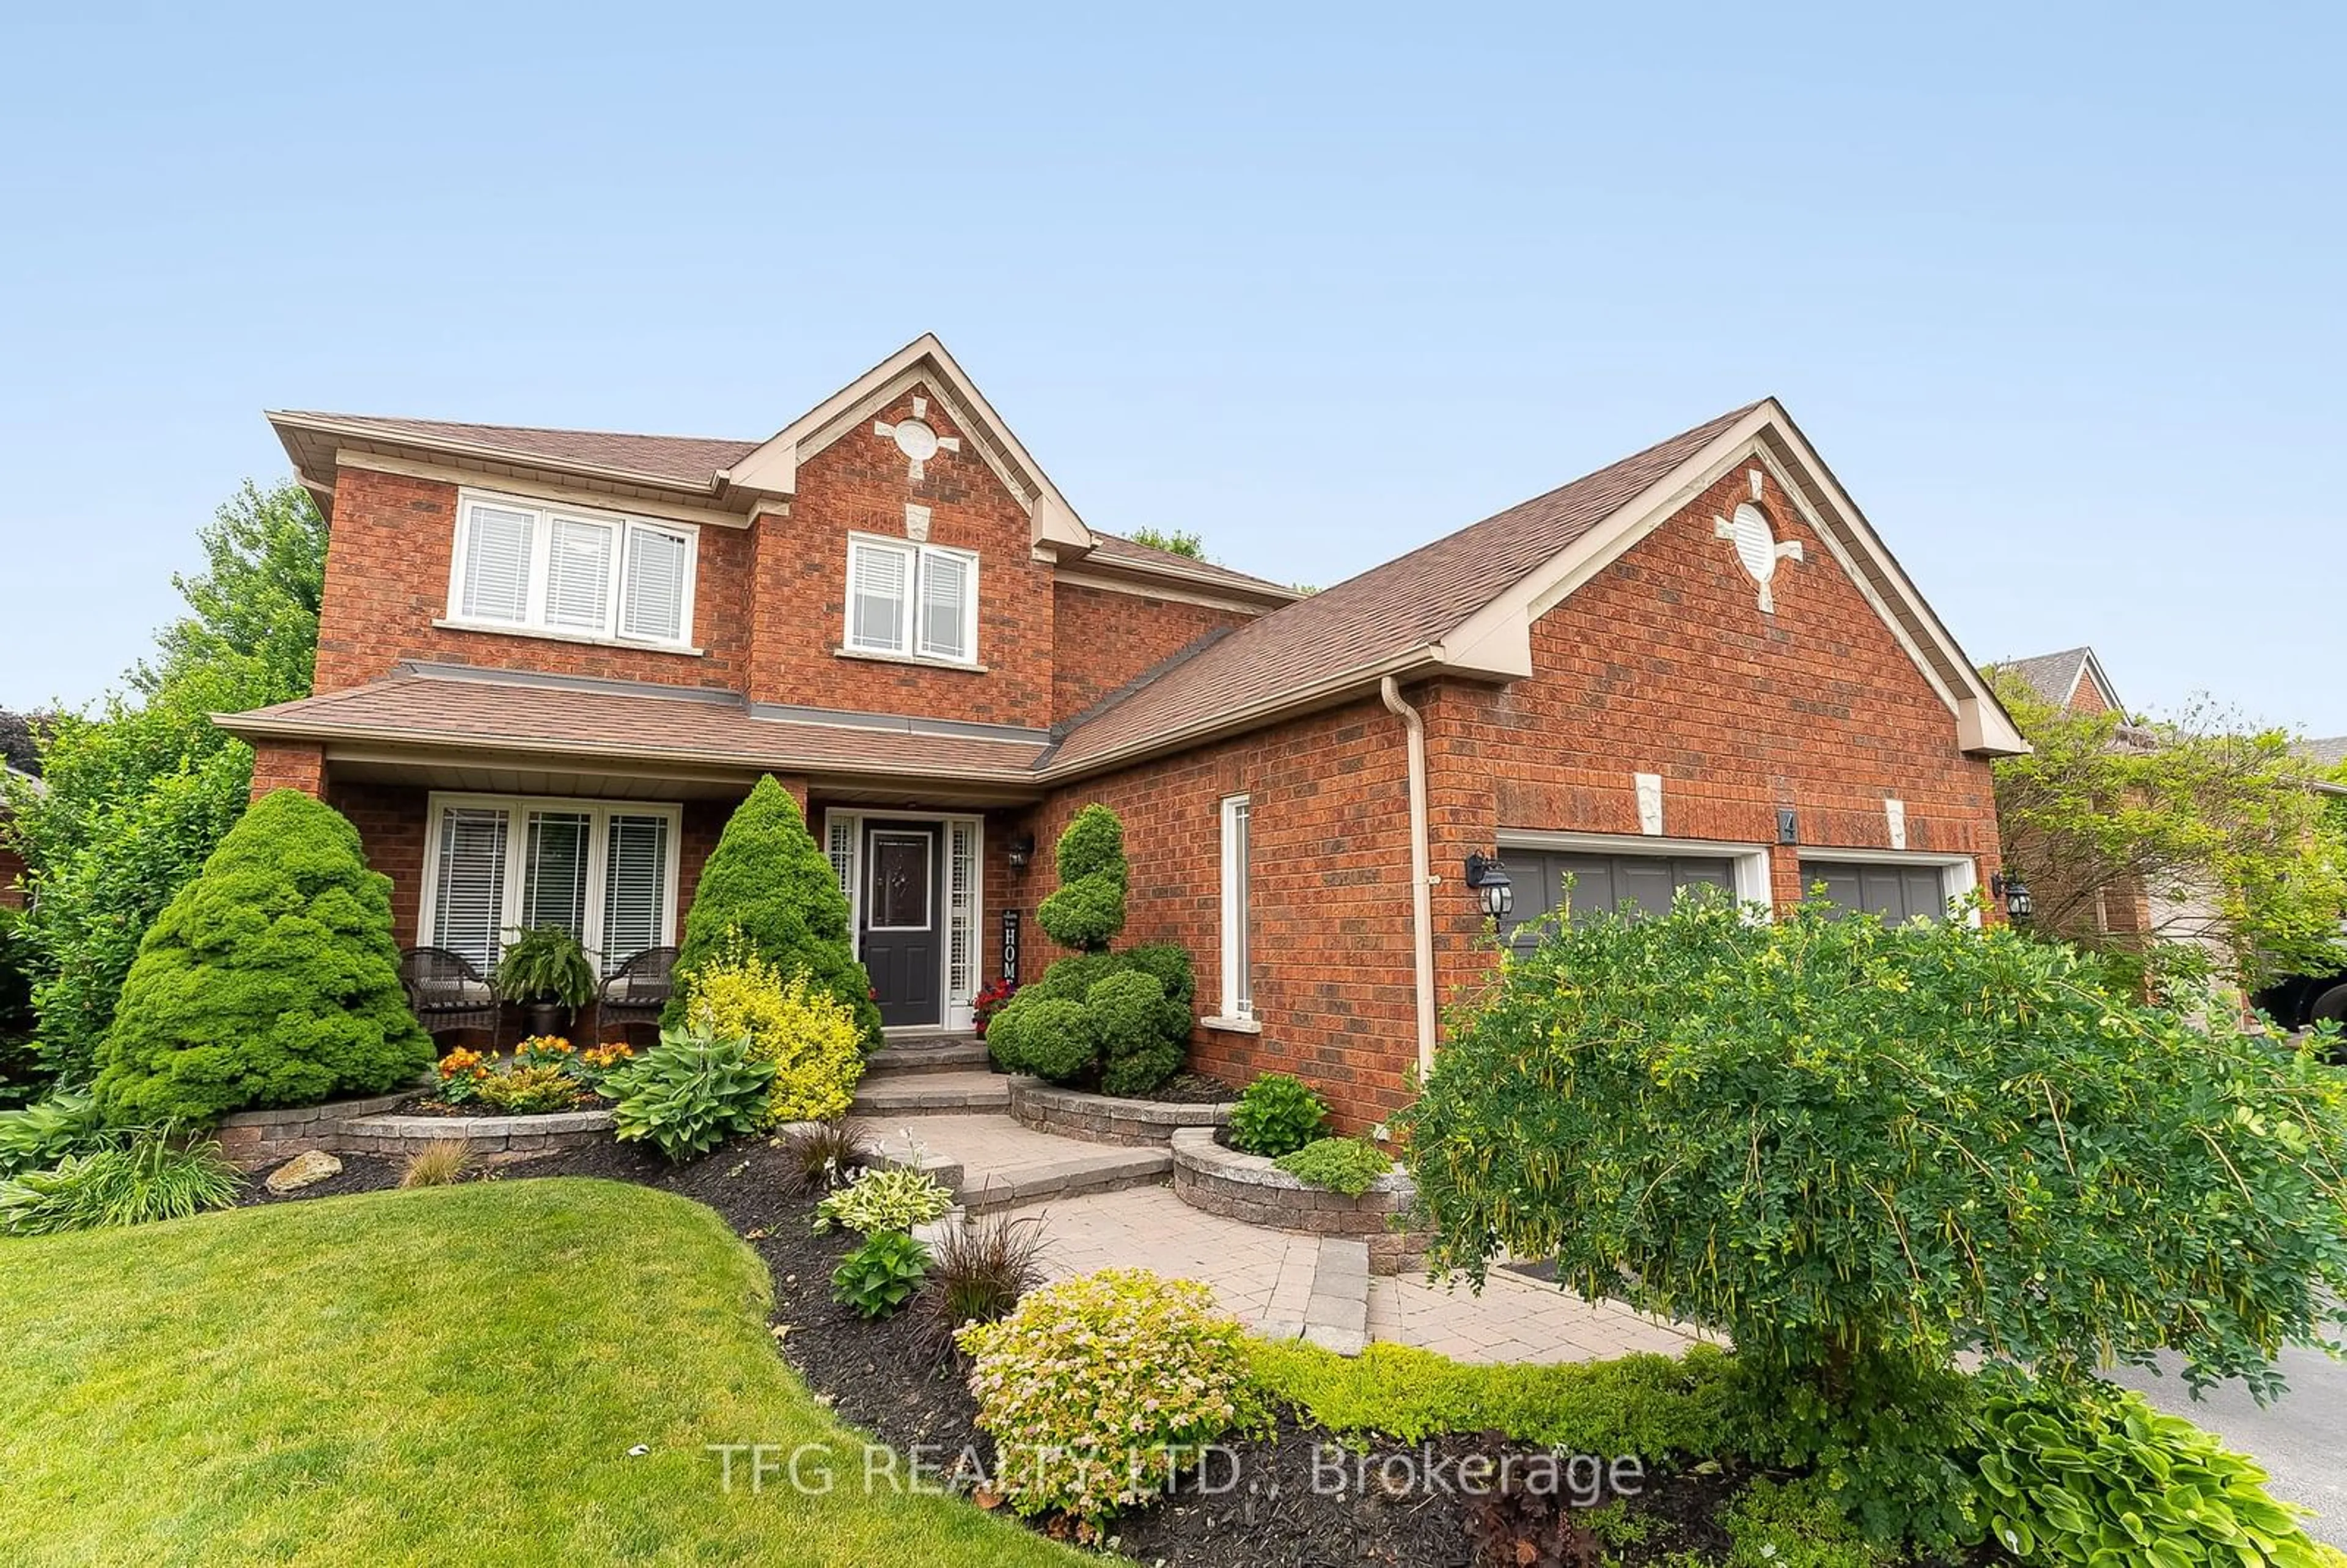 Home with brick exterior material for 4 Mcivor St, Whitby Ontario L1R 2L9